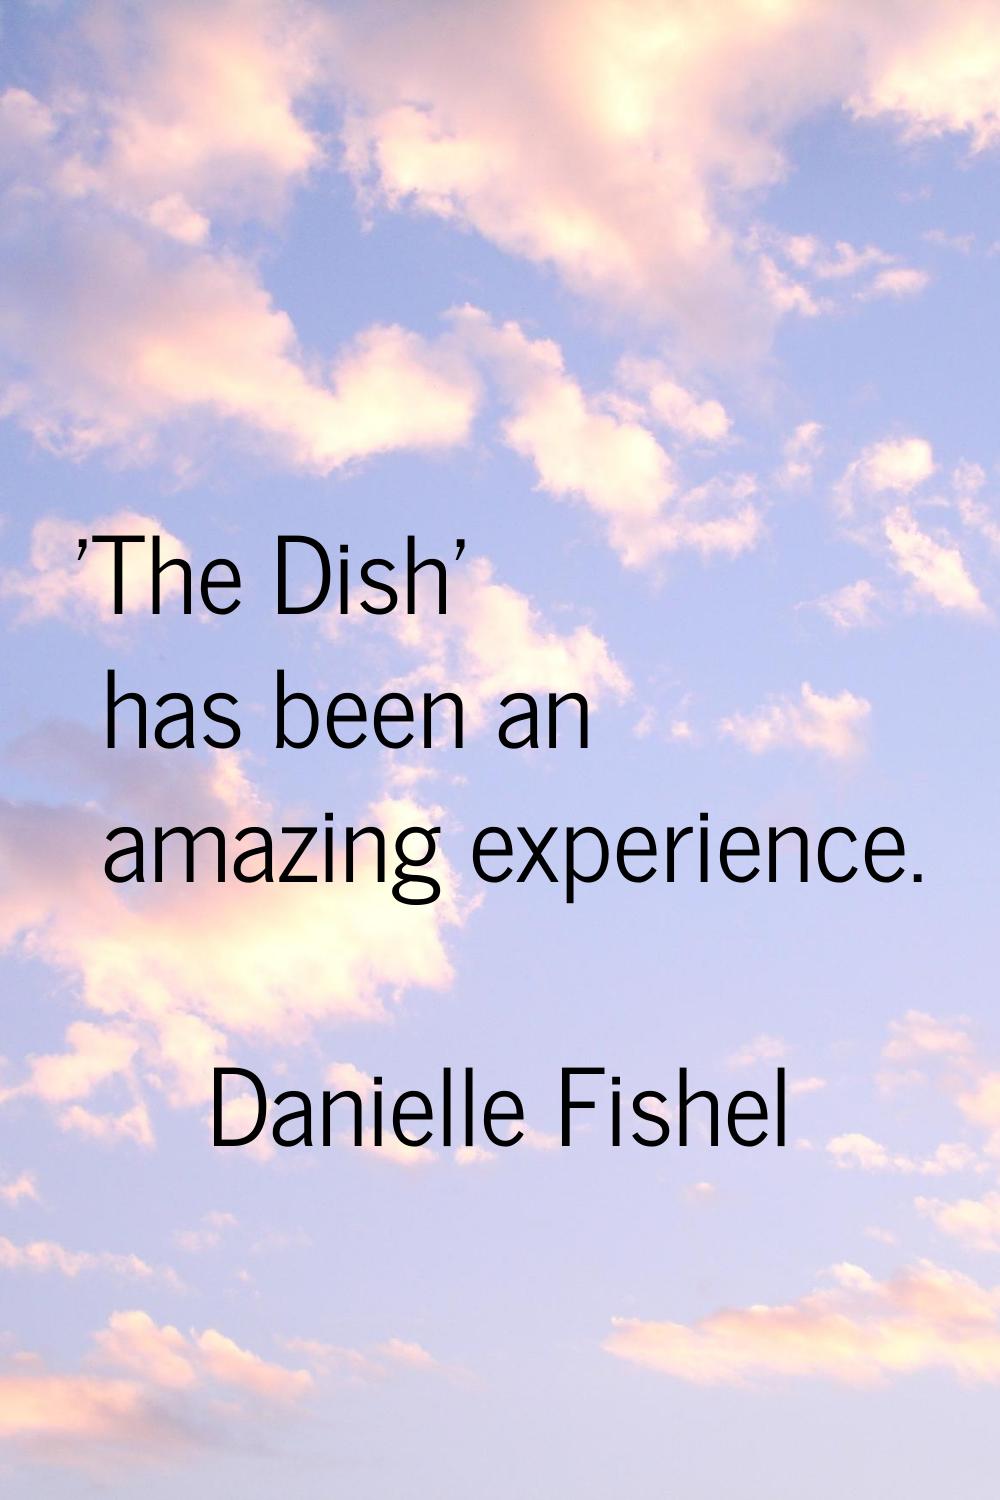 'The Dish' has been an amazing experience.